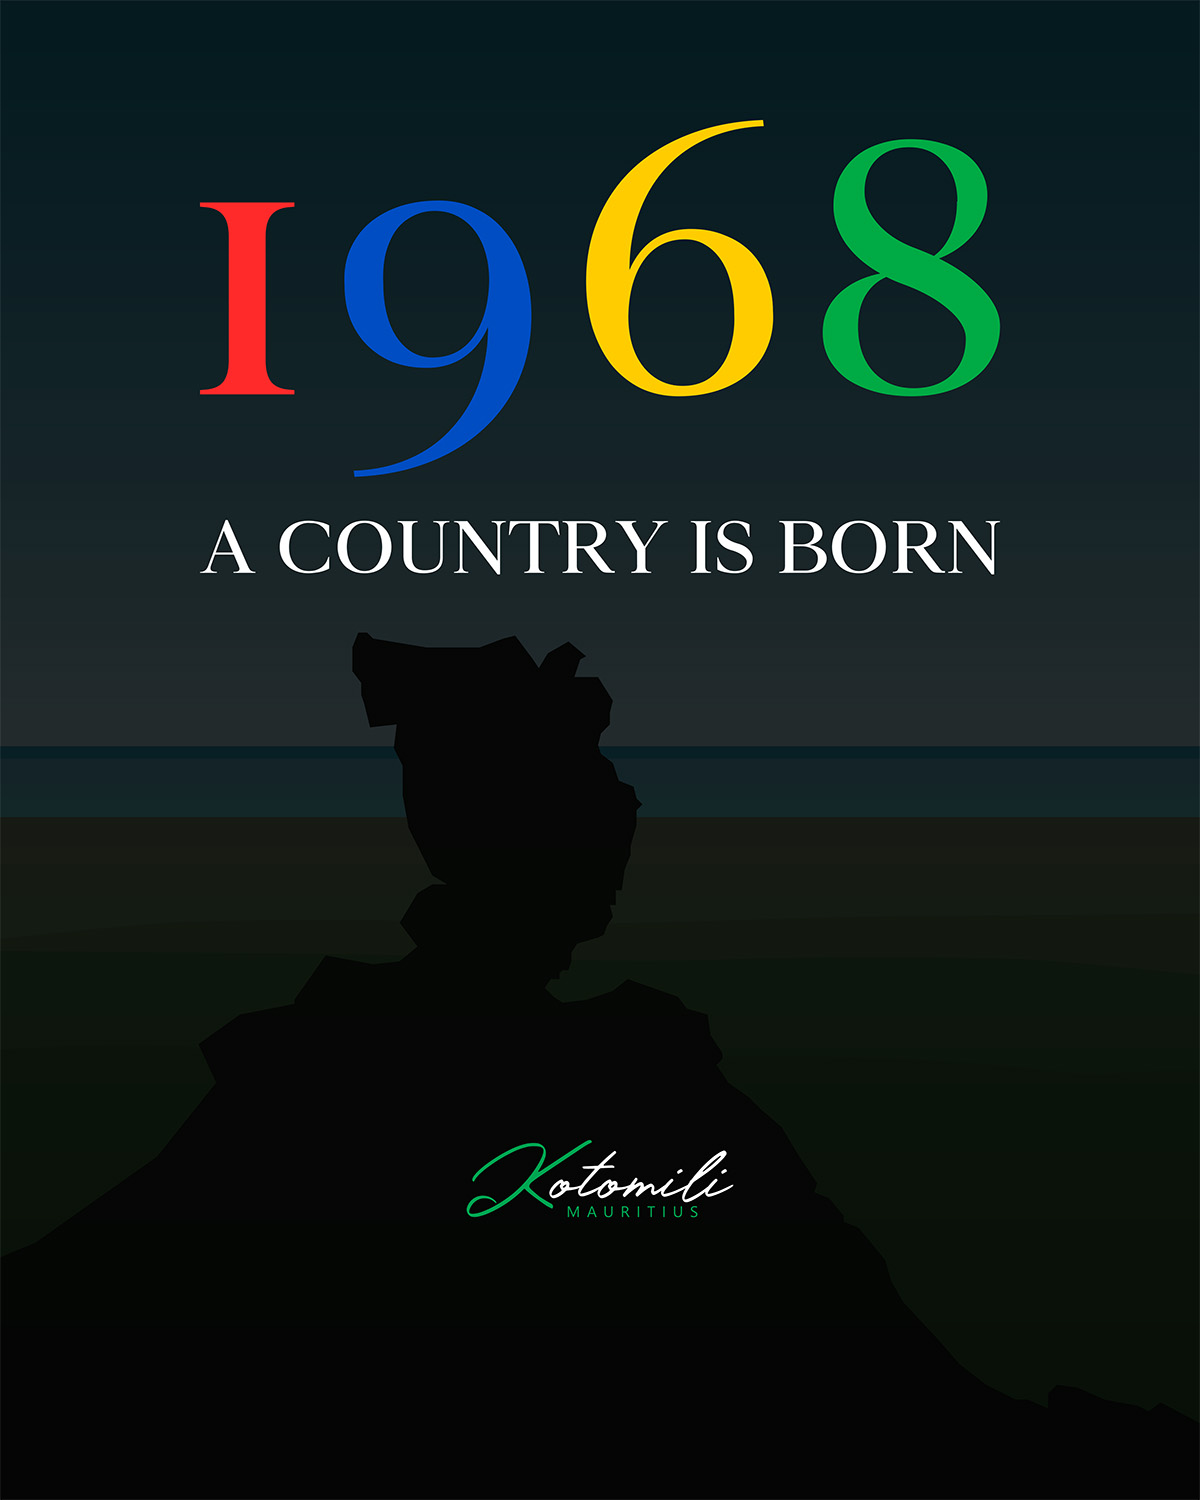 1968 a country is born Mauritius by Kotomili